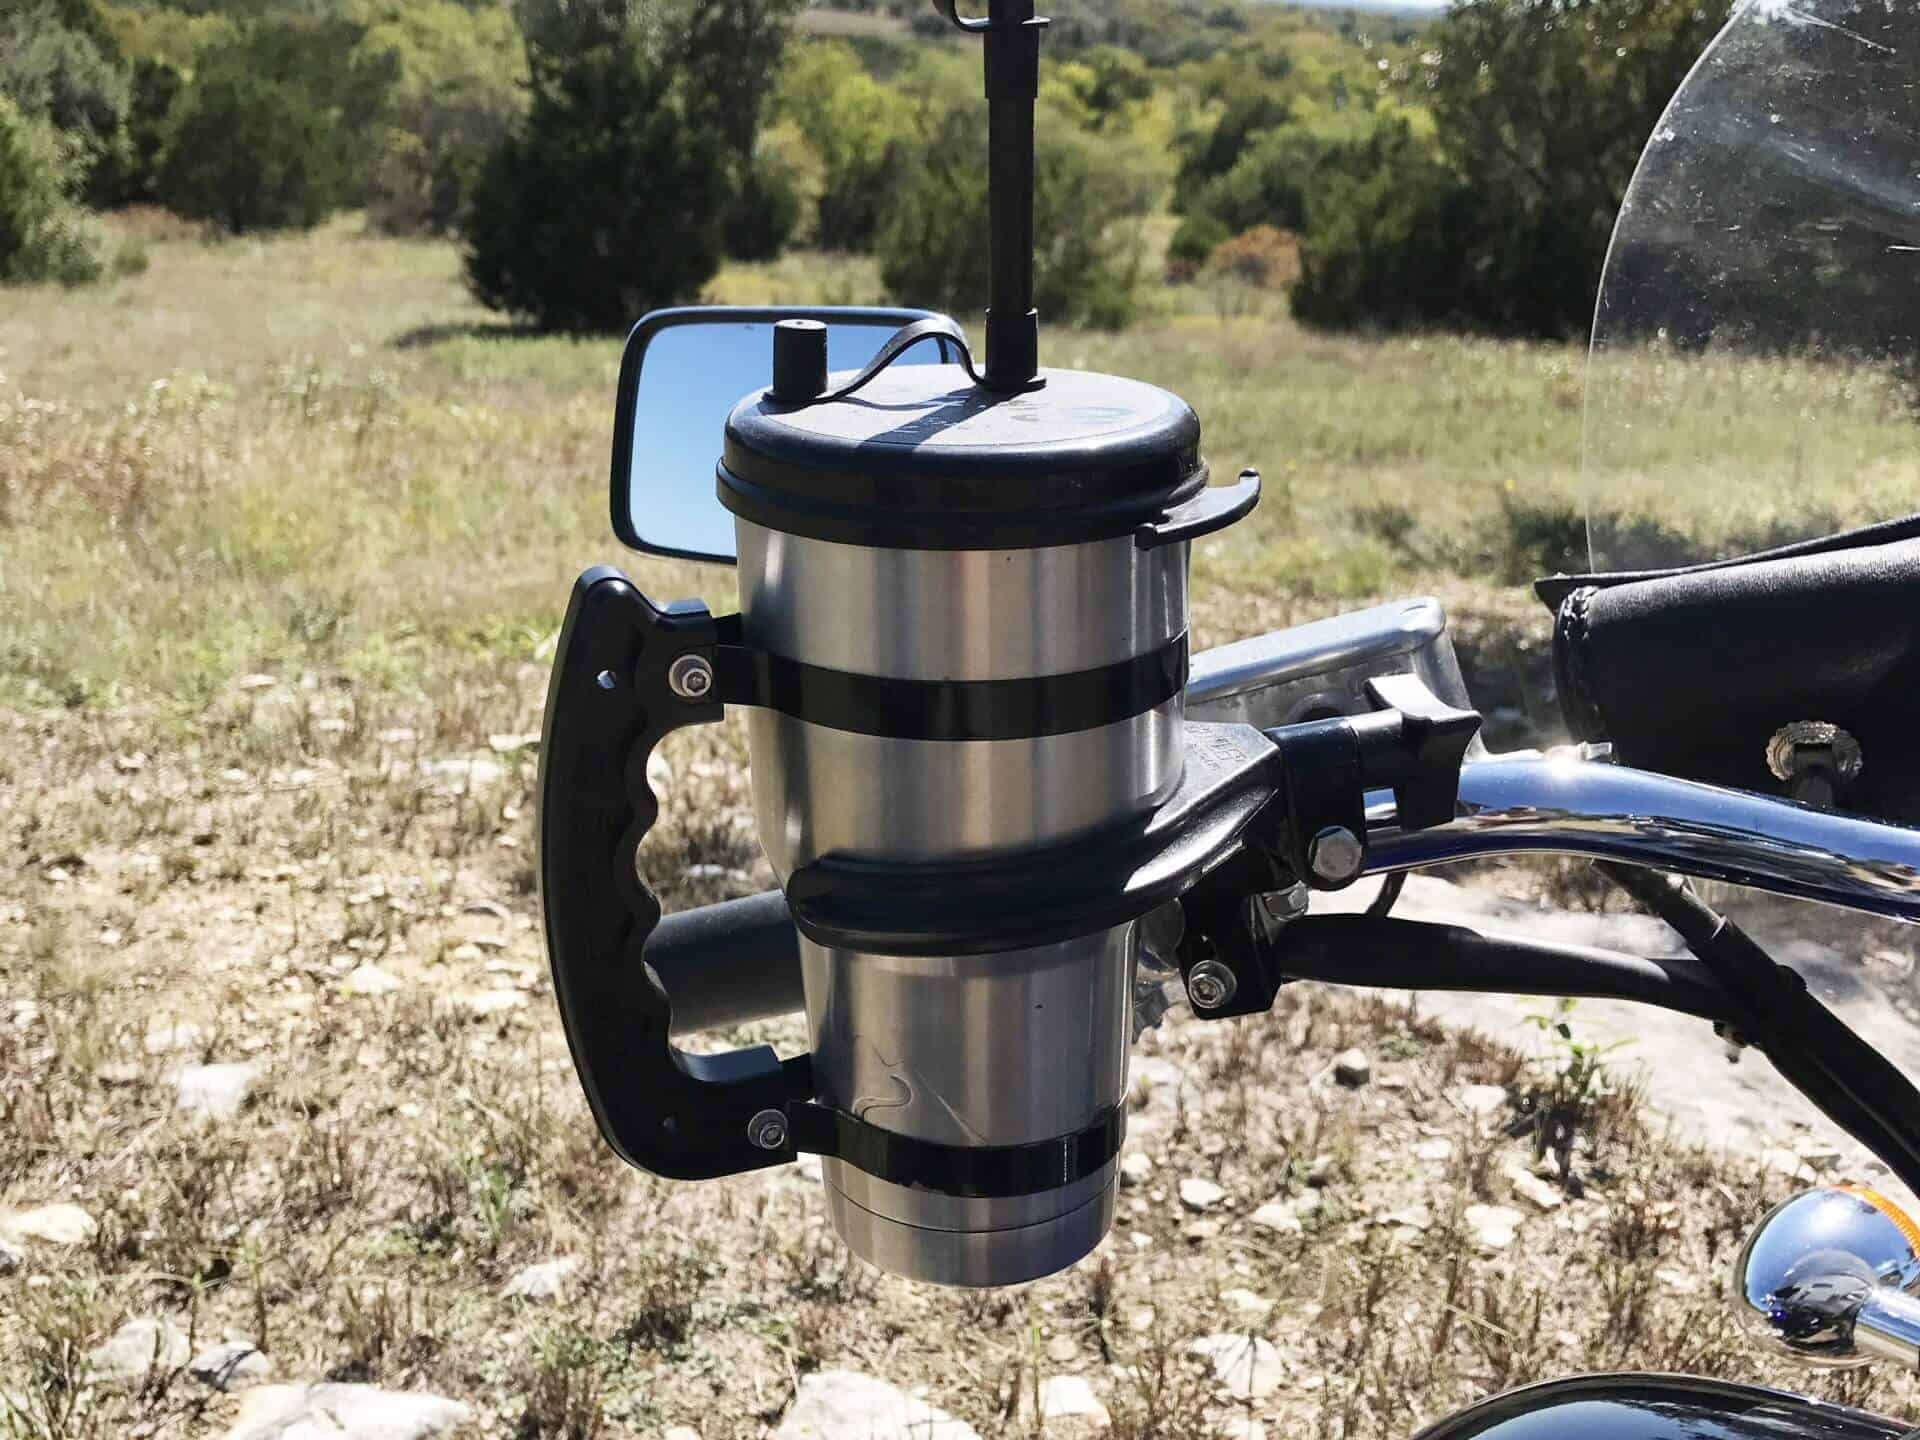 Using Butler Cup Ring to hold 40 oz Yeti or Ozark mugs